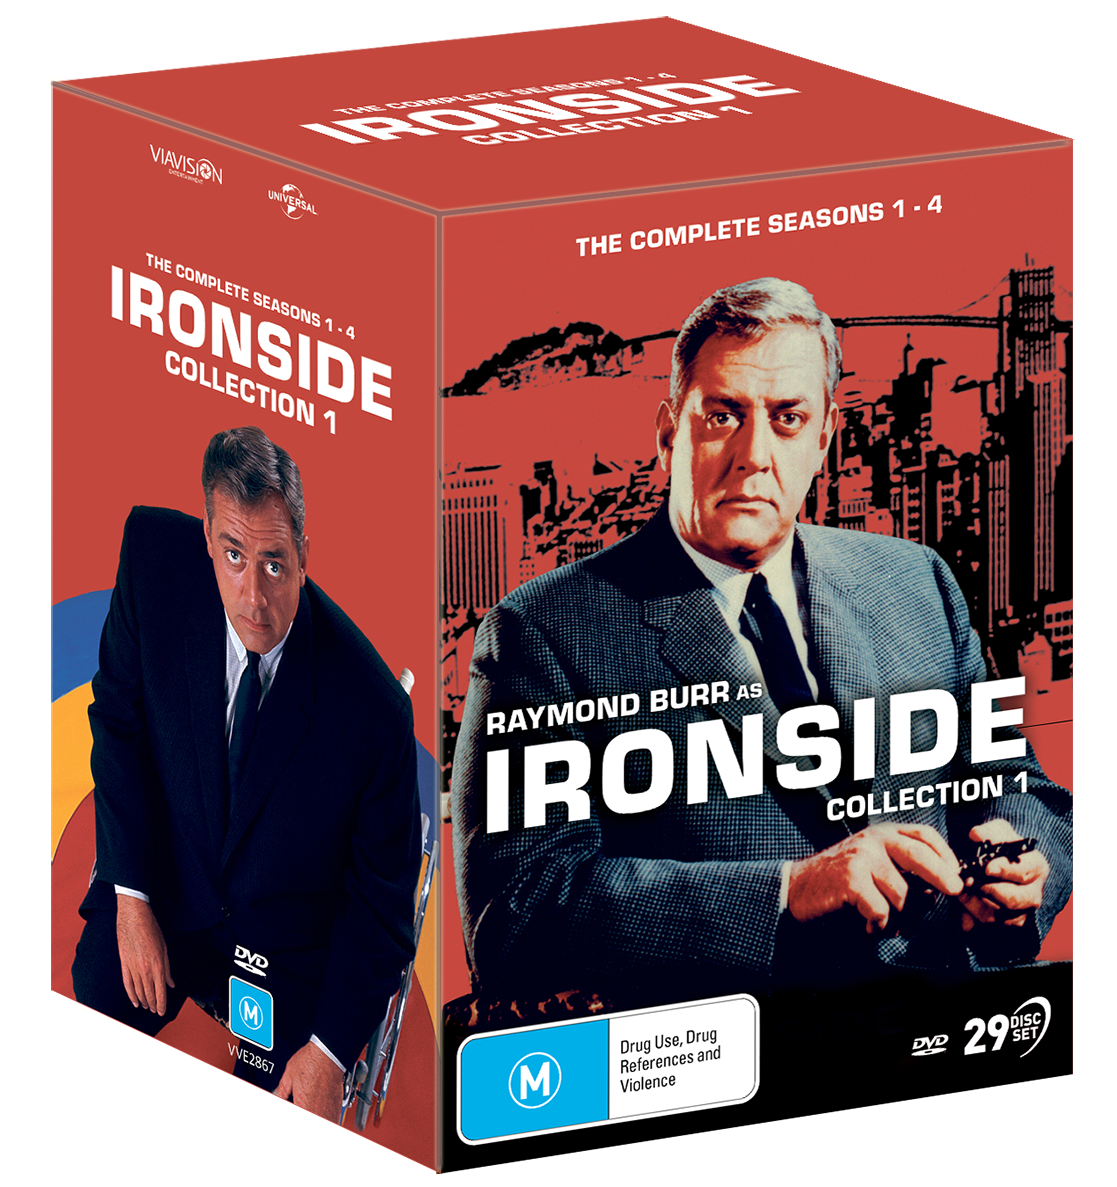 Ironside: Collection One  Via Vision Entertainment